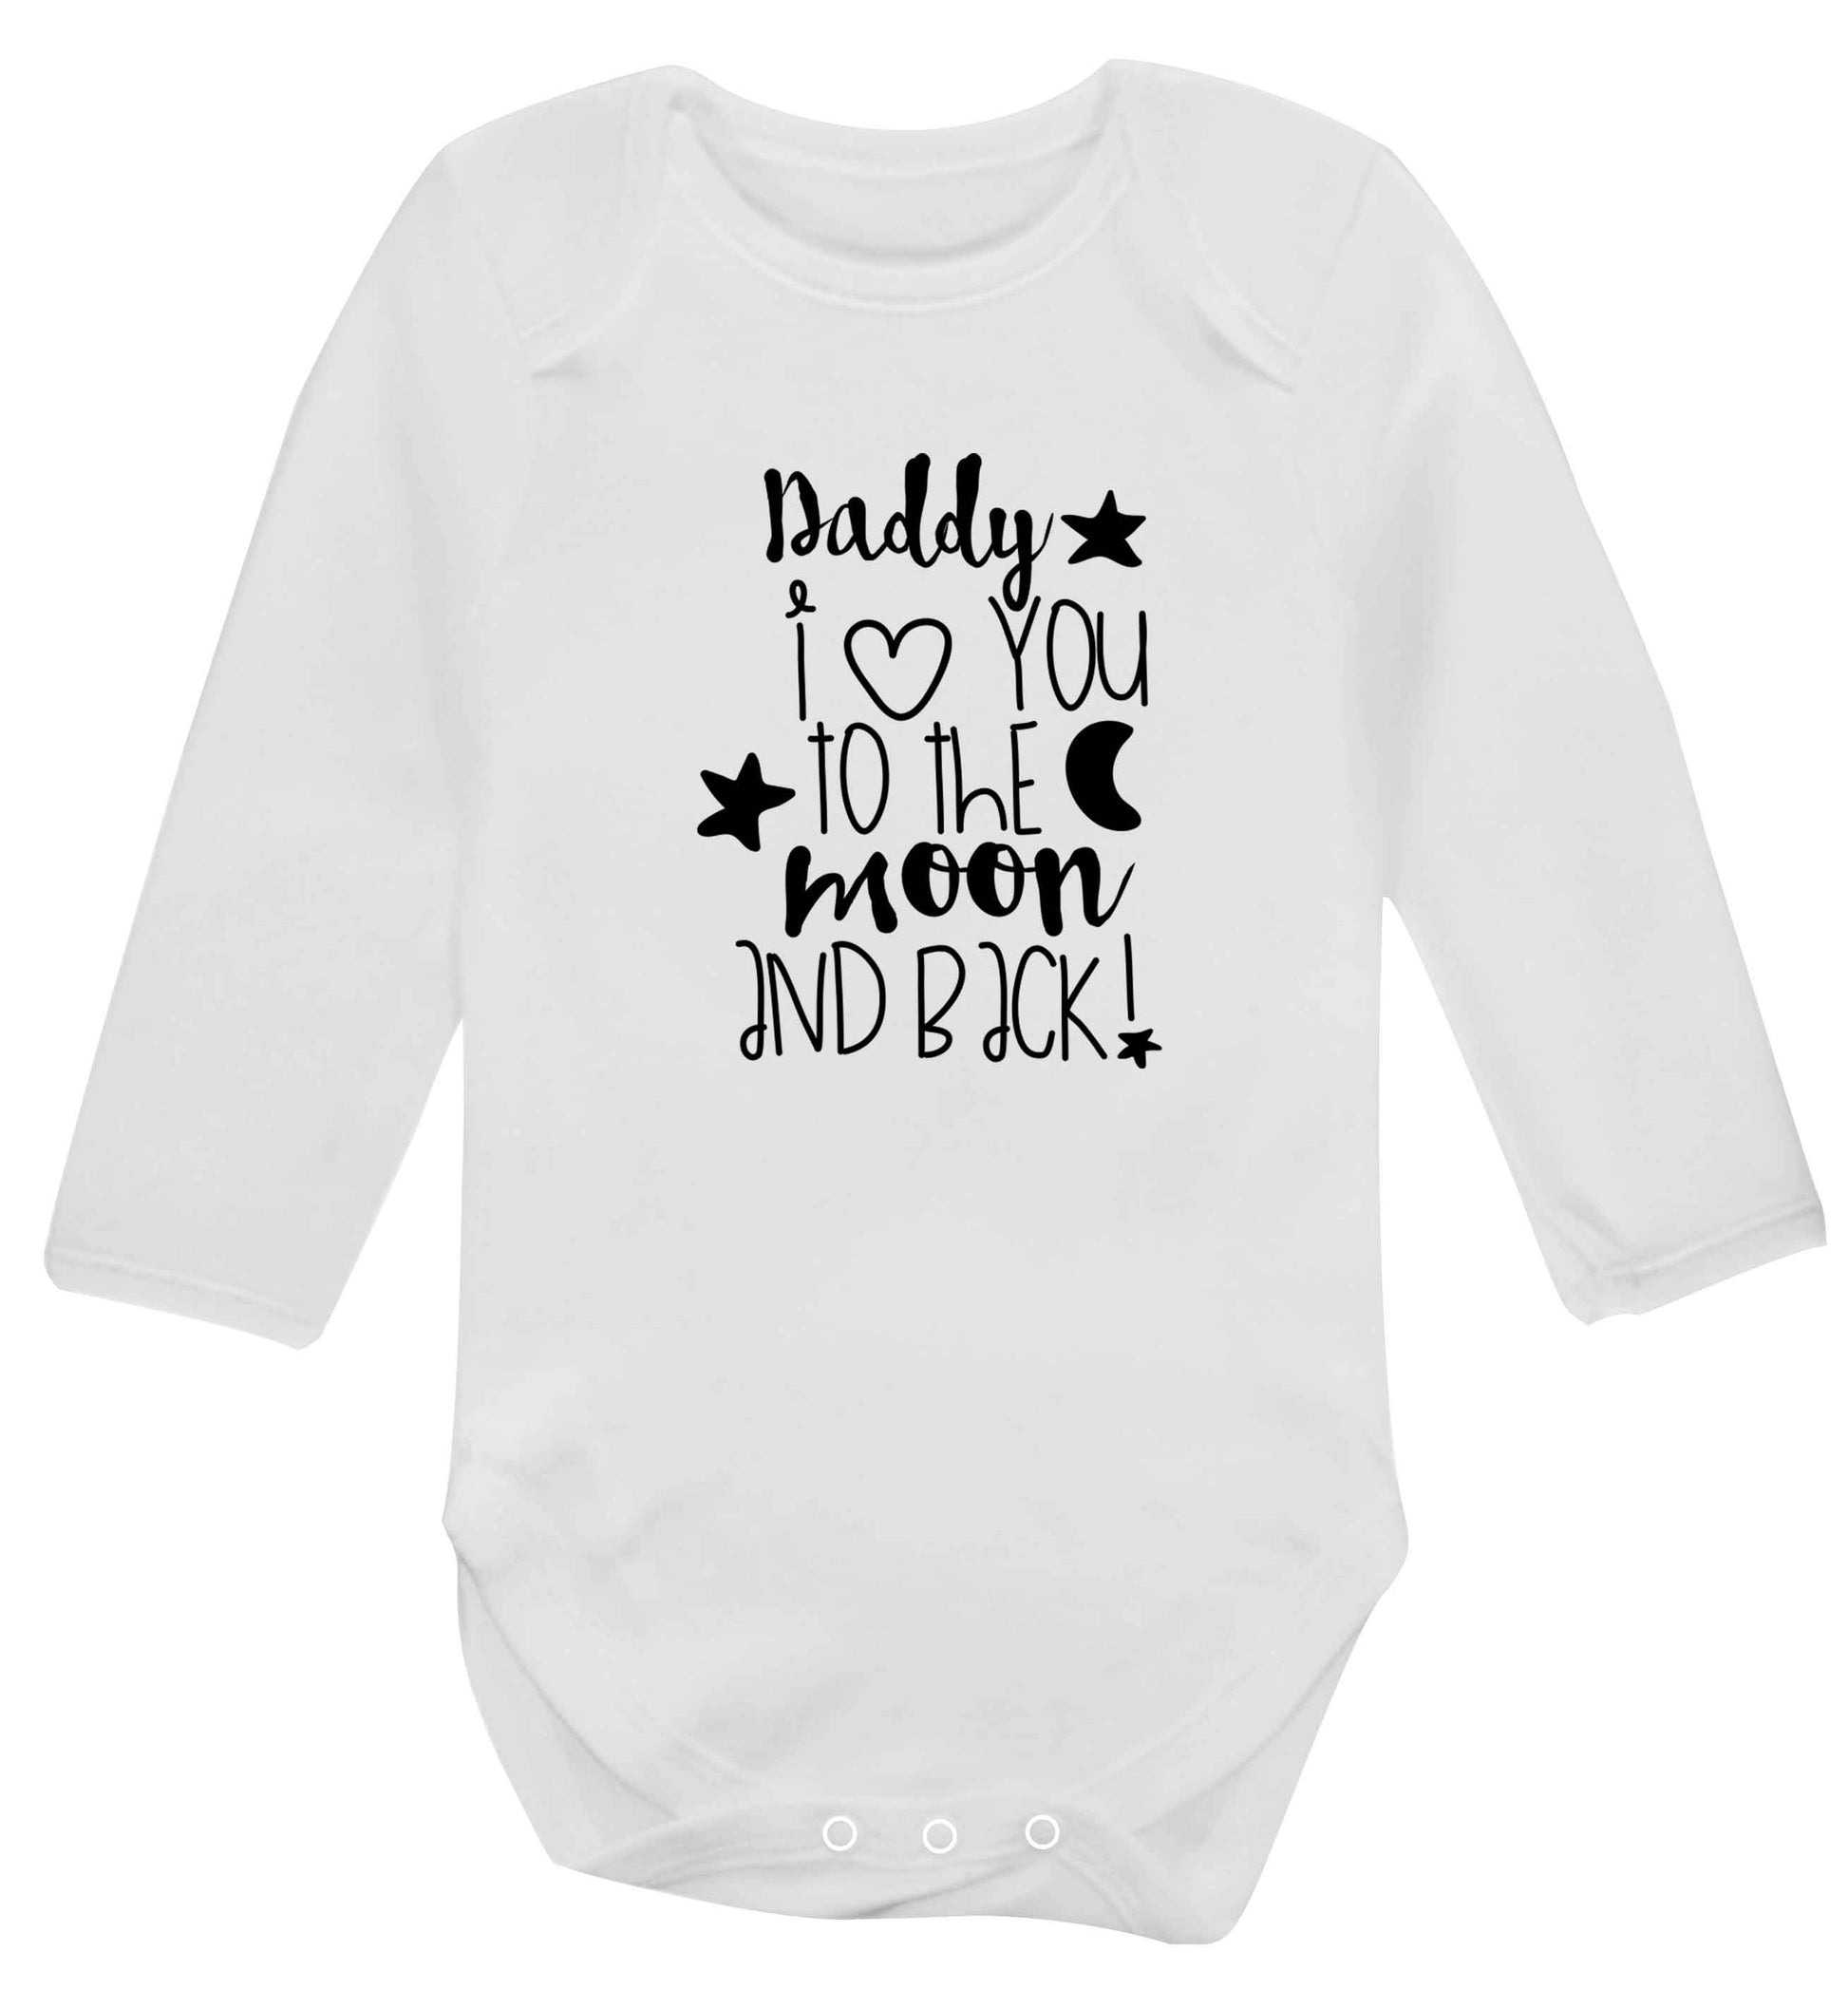 Daddy I love you to the moon and back baby vest long sleeved white 6-12 months